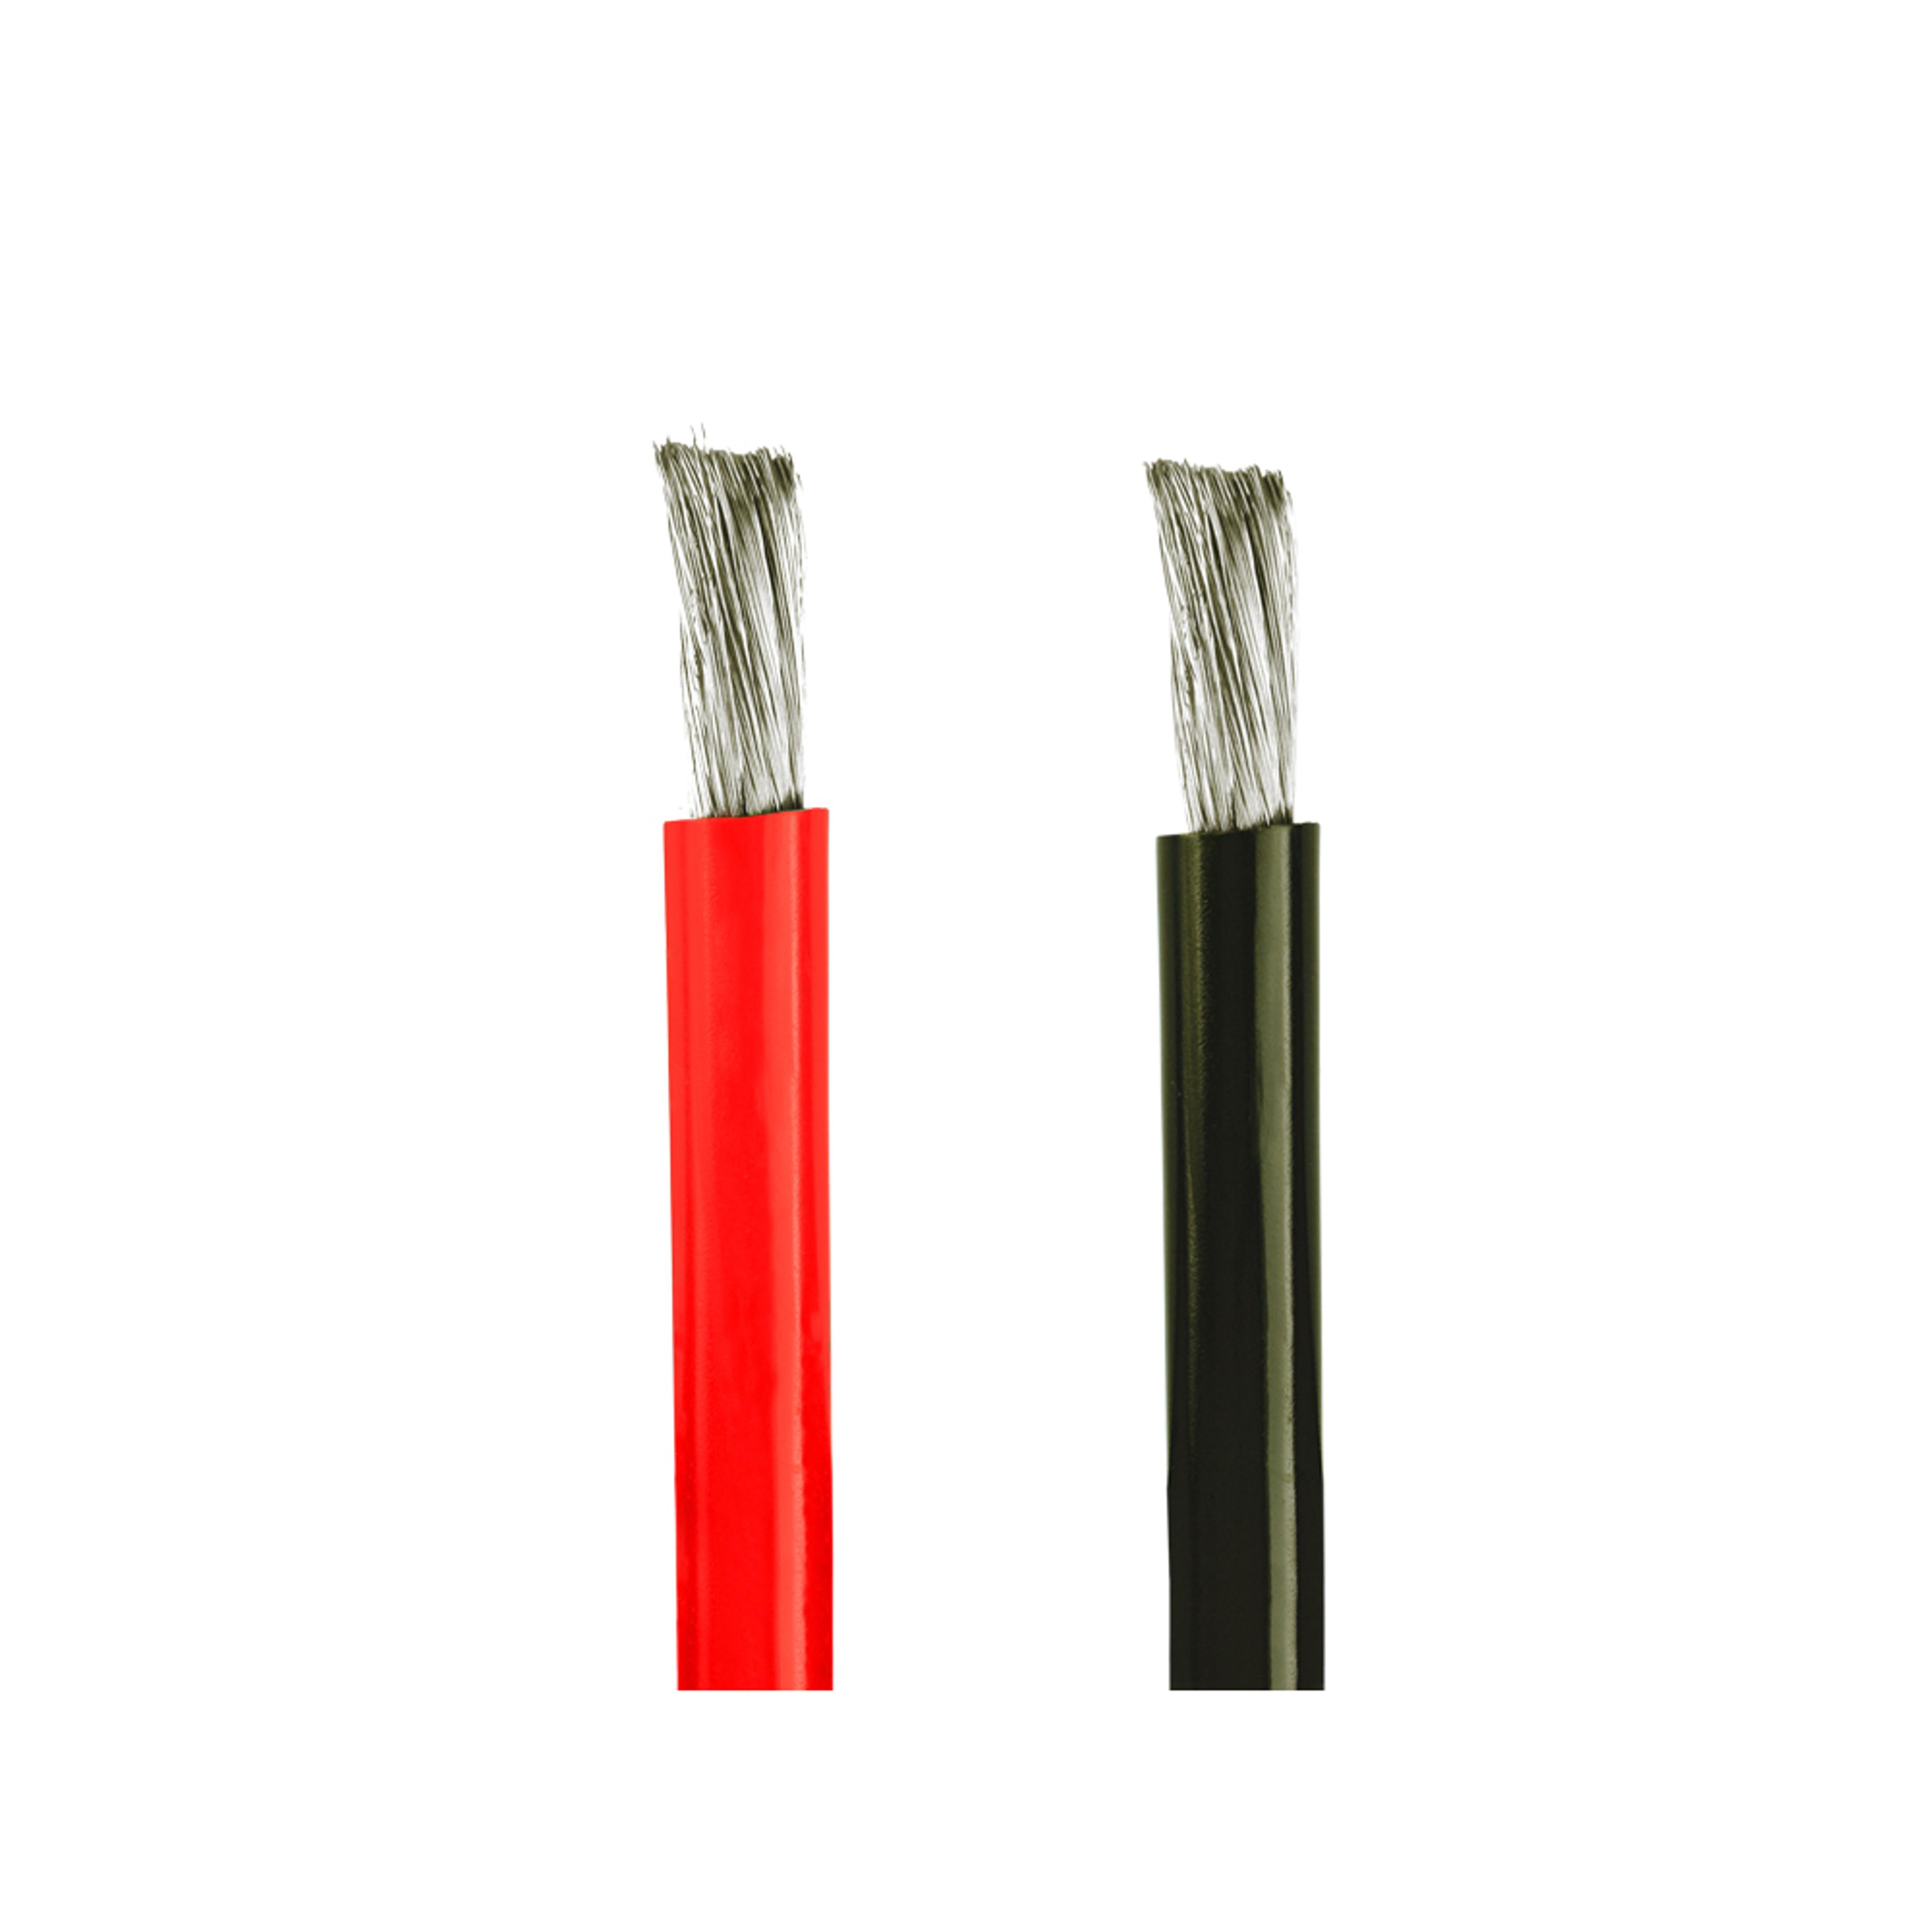 Wire 12 Gauge (12 AWG) Silicone Wire - 3 Ft of Red & and 3 Ft of Black